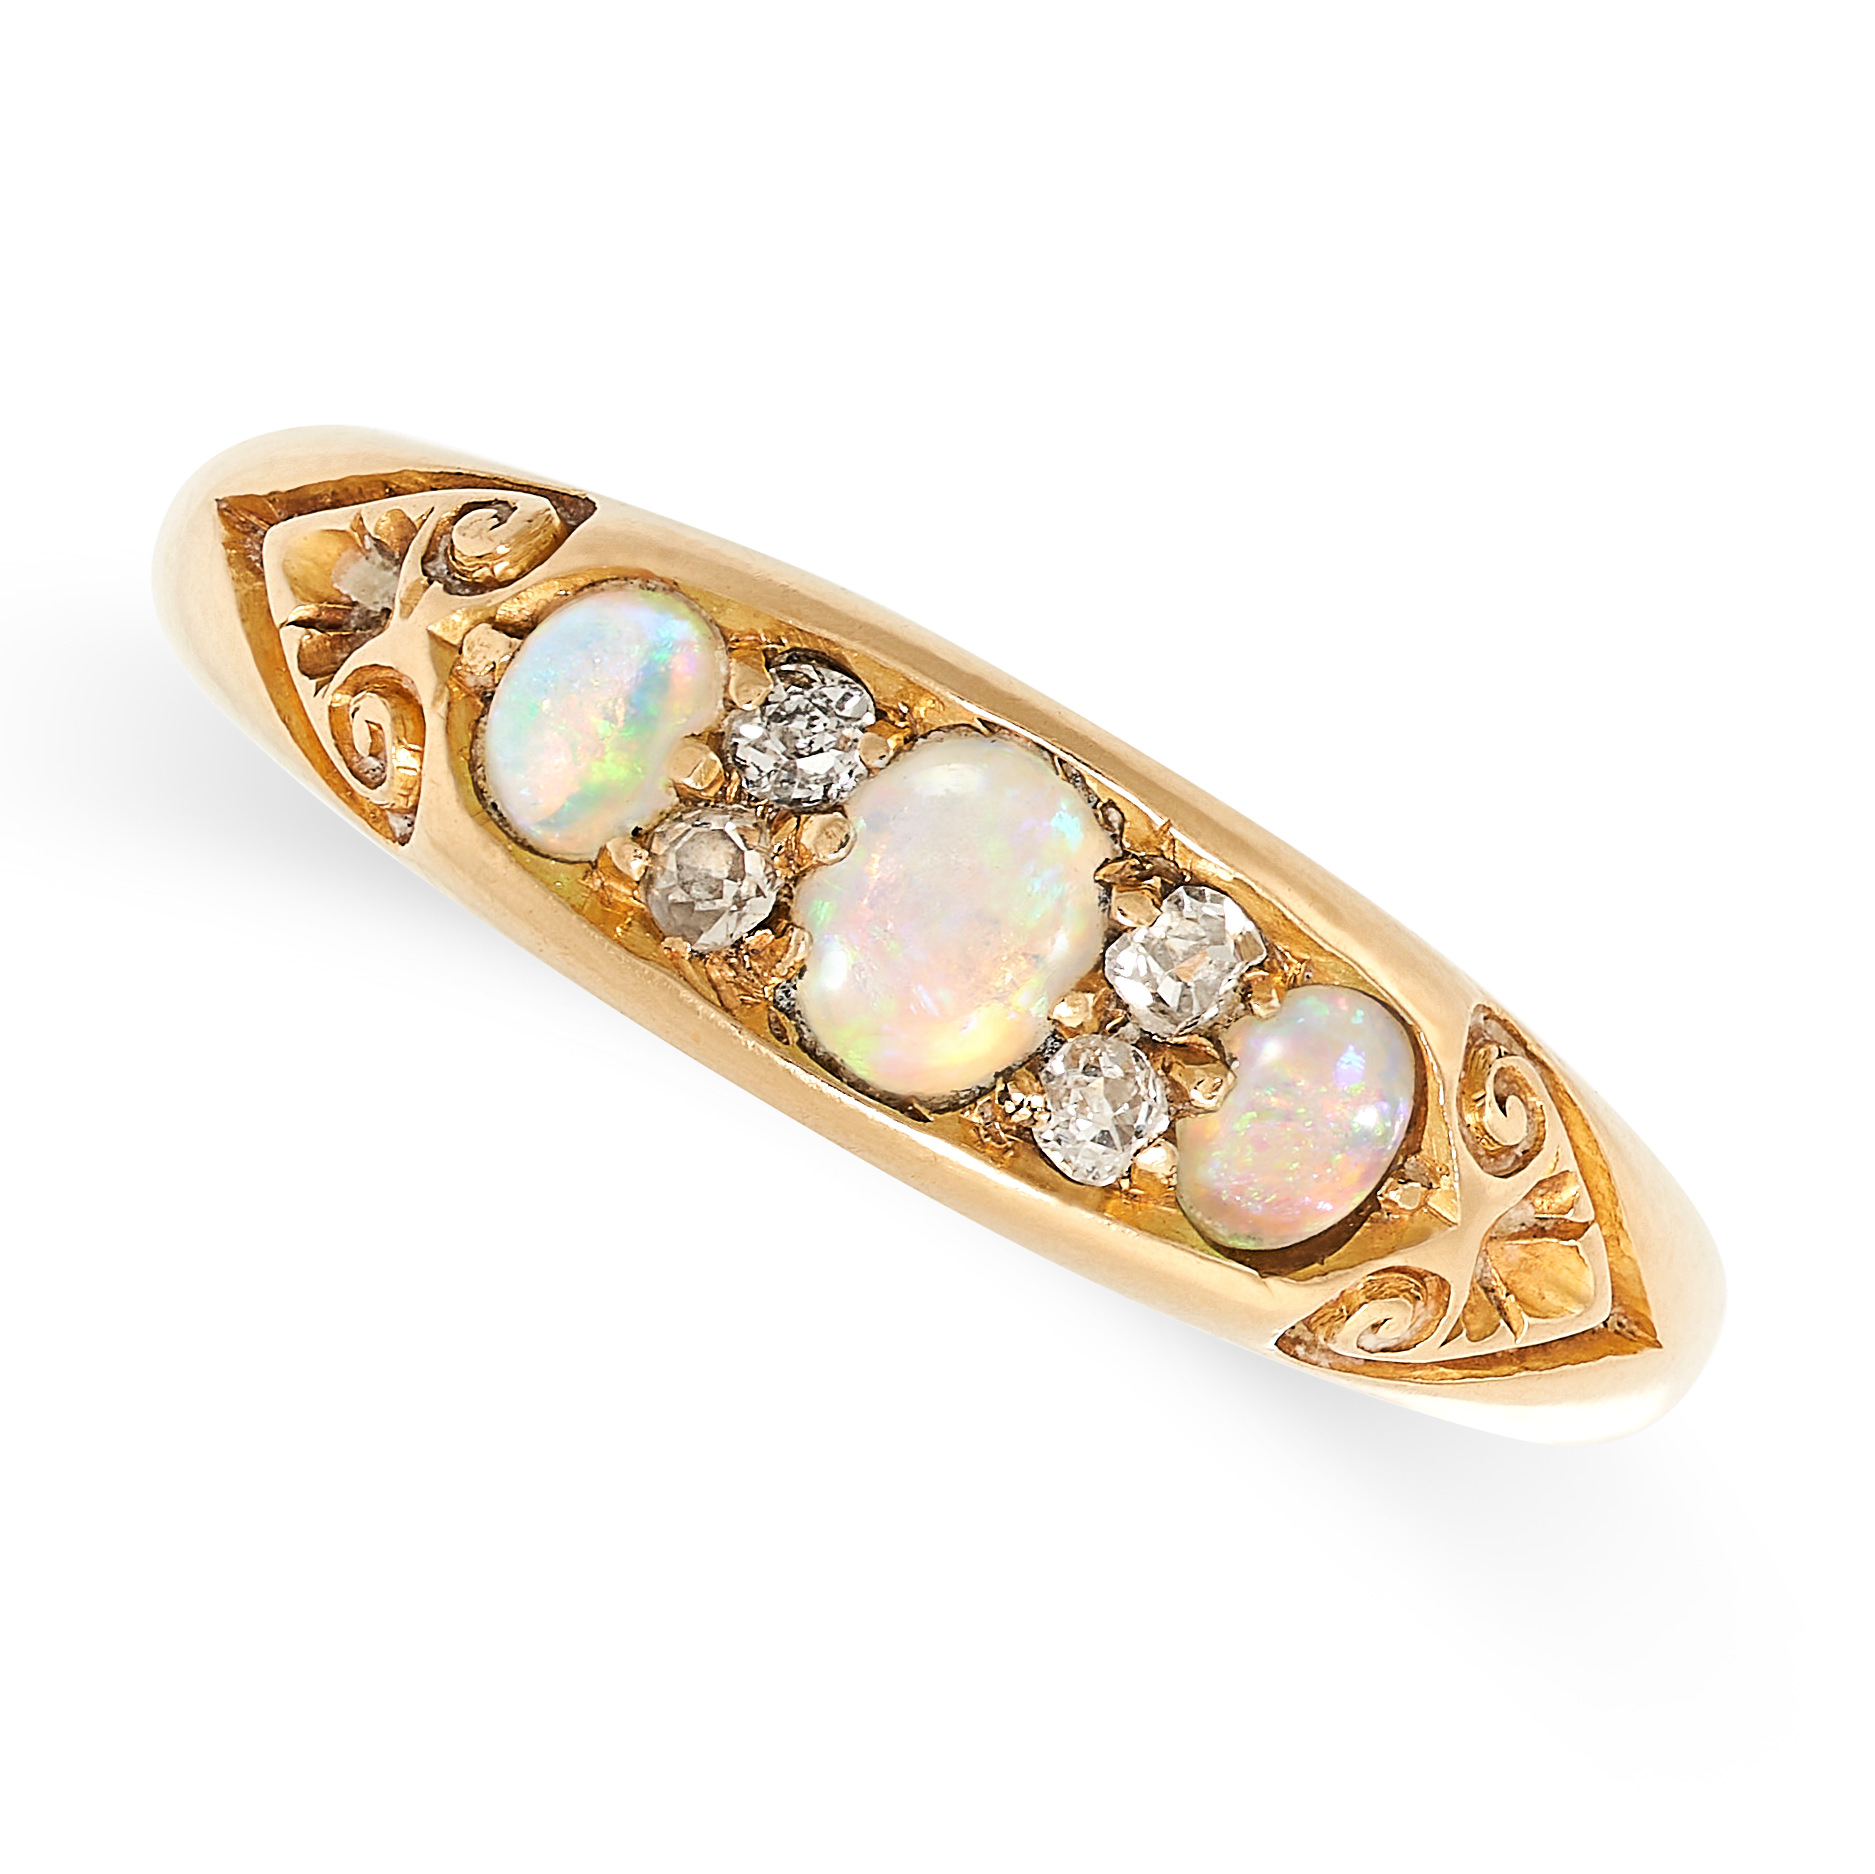 AN ANTIQUE OPAL AND DIAMOND RING in 18ct yellow gold, set with three graduated oval opal